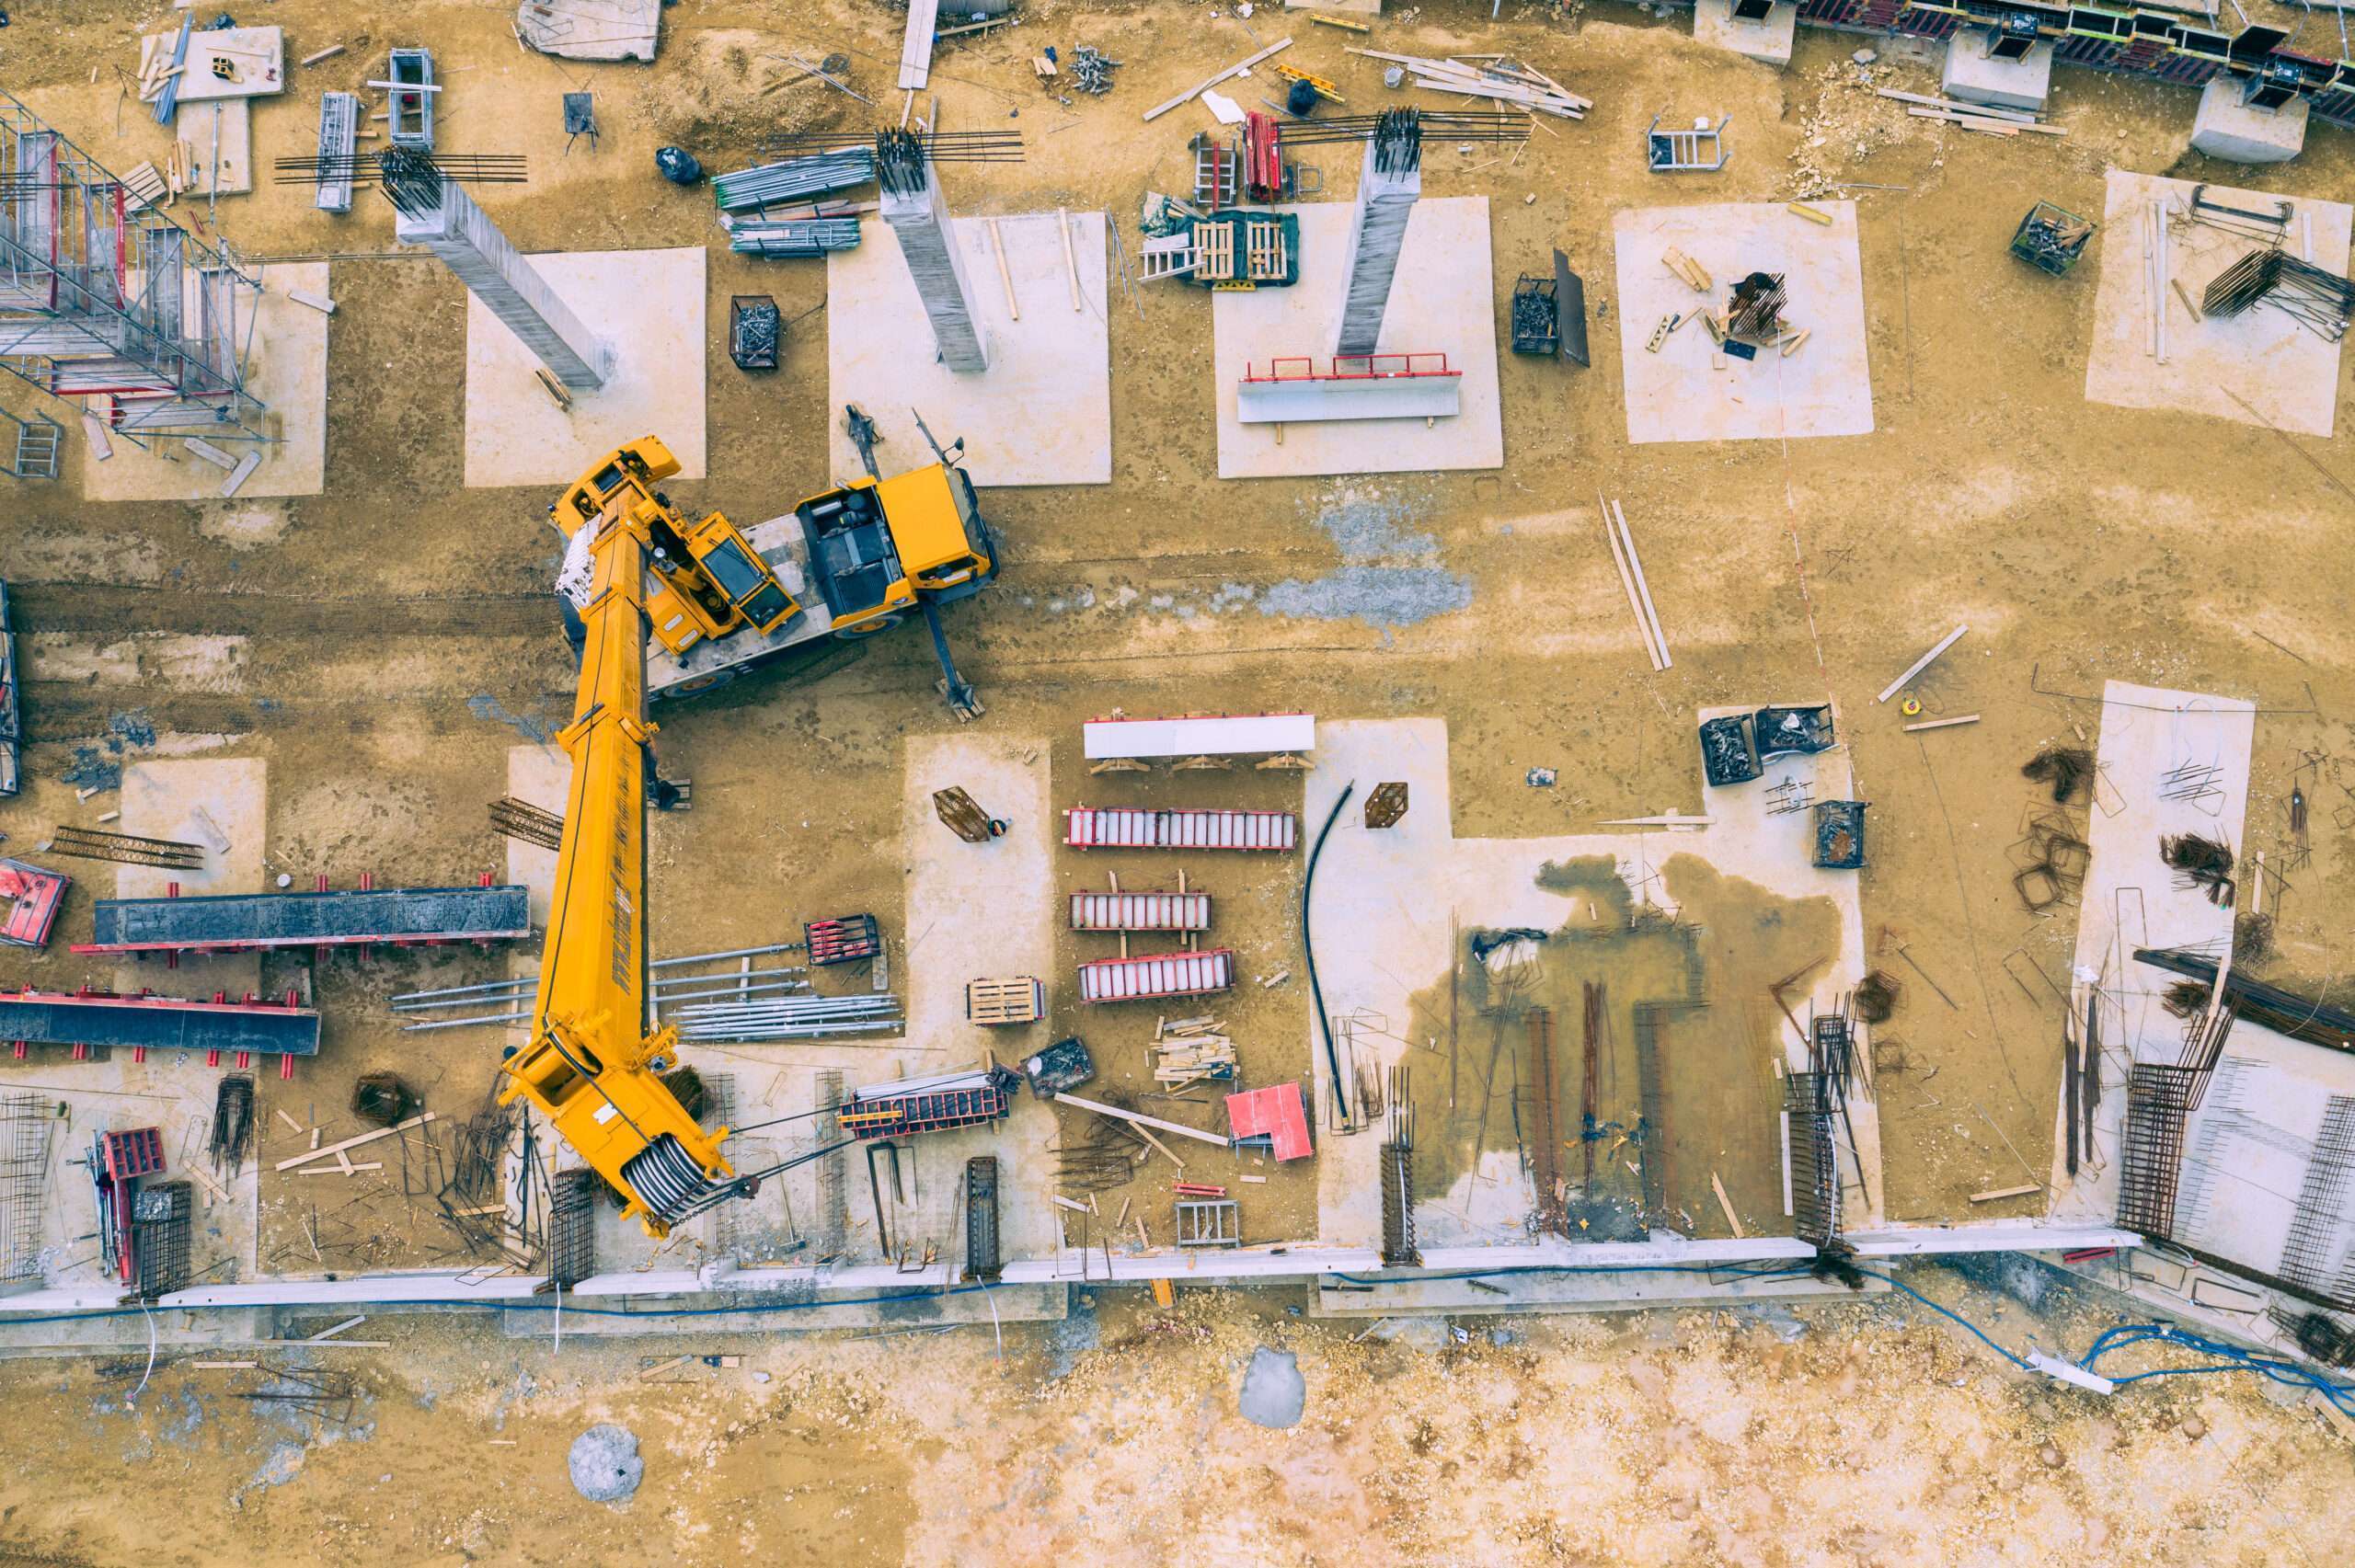 AI Powered Drones Construction site from above. Aerial view of workplaces in construction equipment, workers with heavy machinery. Industrial top view made by drone.